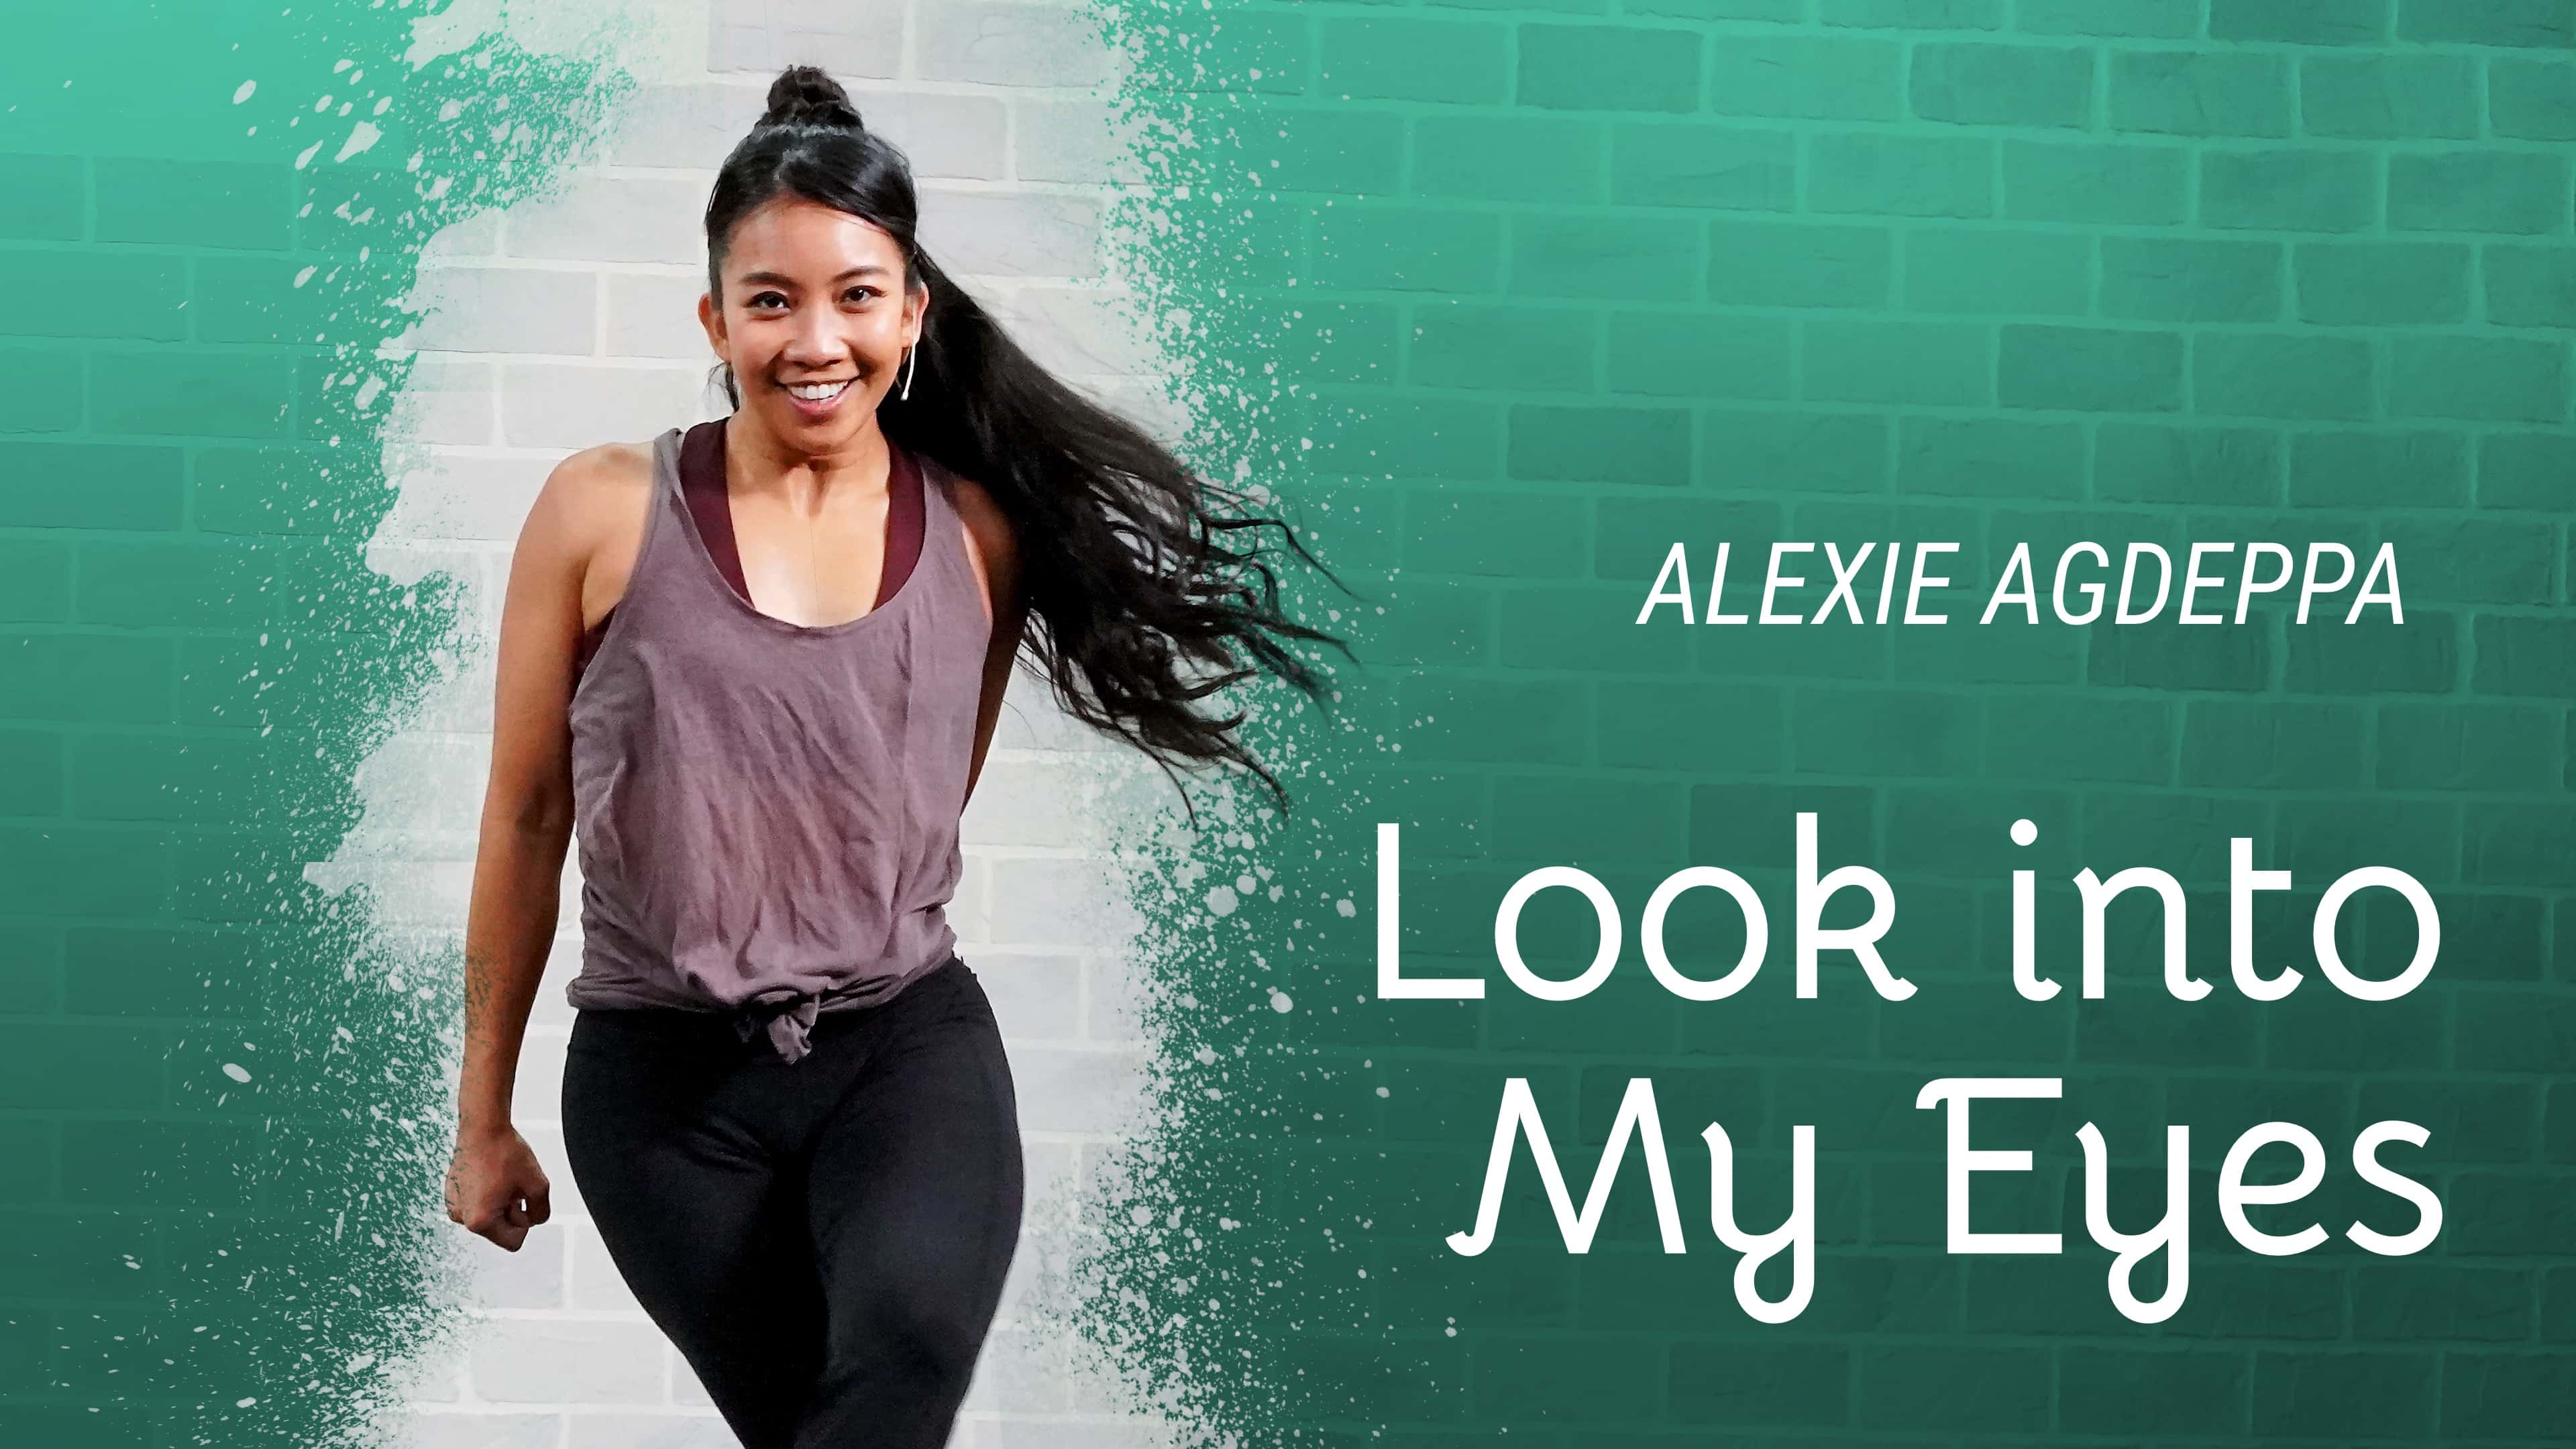 Look Into My Eyes Online Dance Class taught by Alexie Agdeppa.